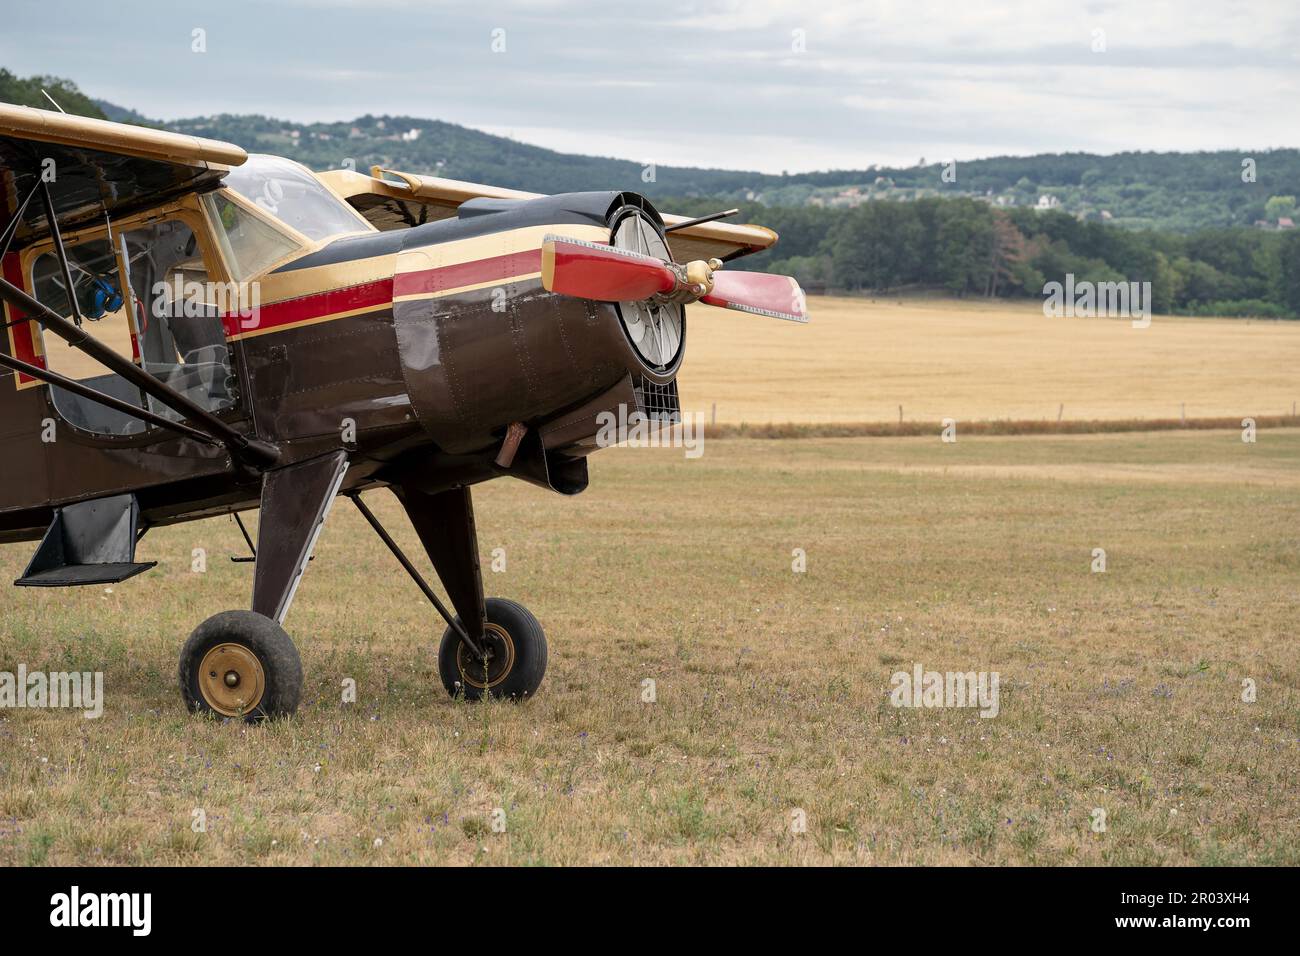 Detail of a classic airplane on the field. Biplane. Nine cylinder radial engine. Countryside in the background. Stock Photo